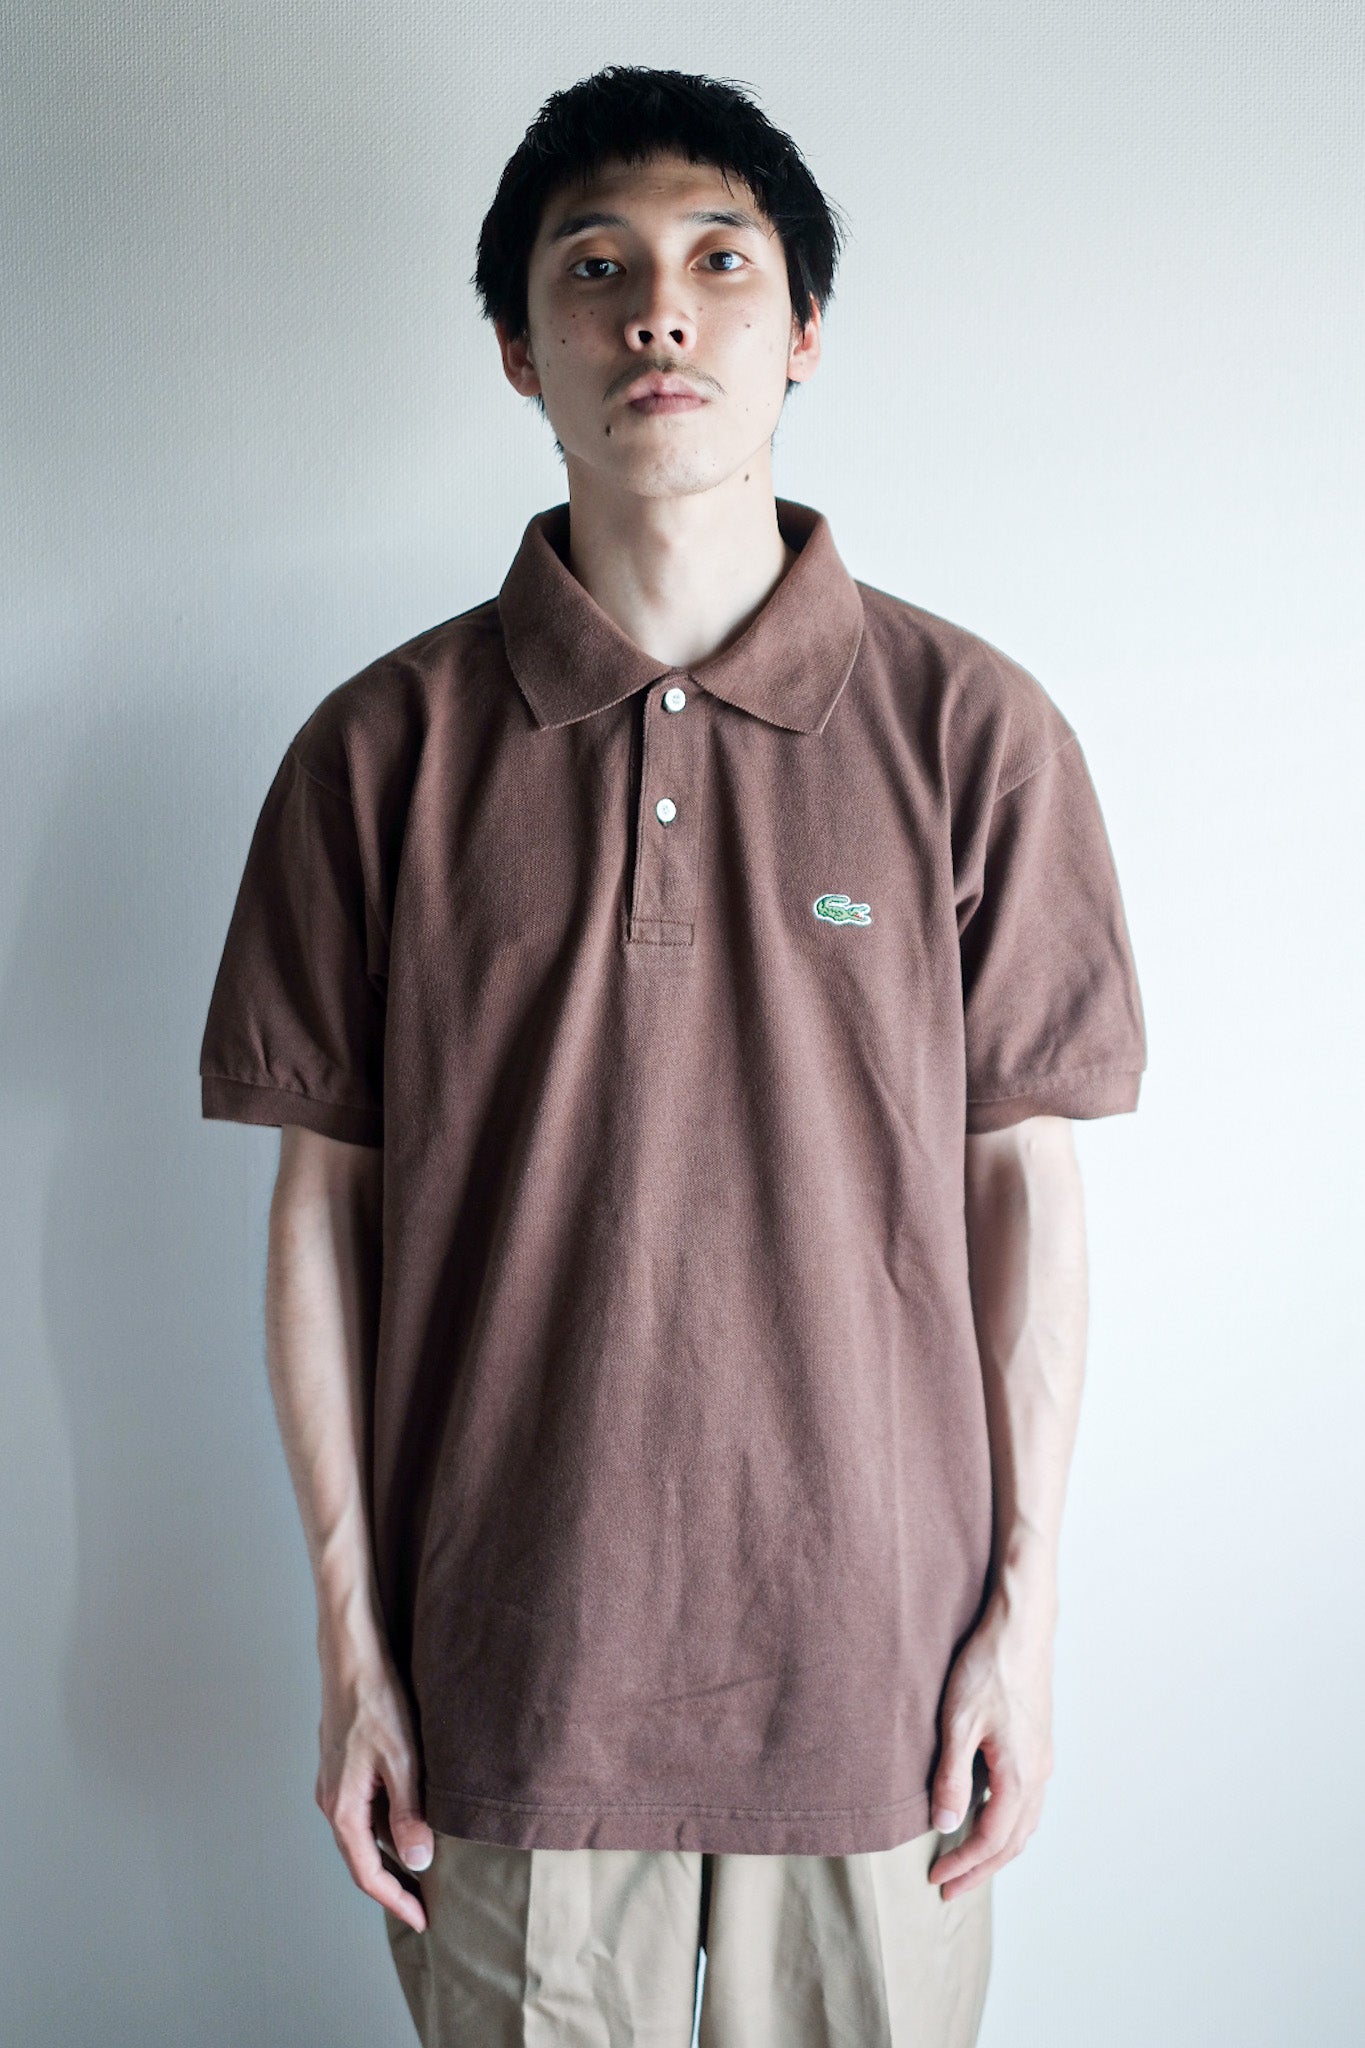 [~ 80's] Chemise Lacoste S/S Polo Shirt Size.6 "Brown"